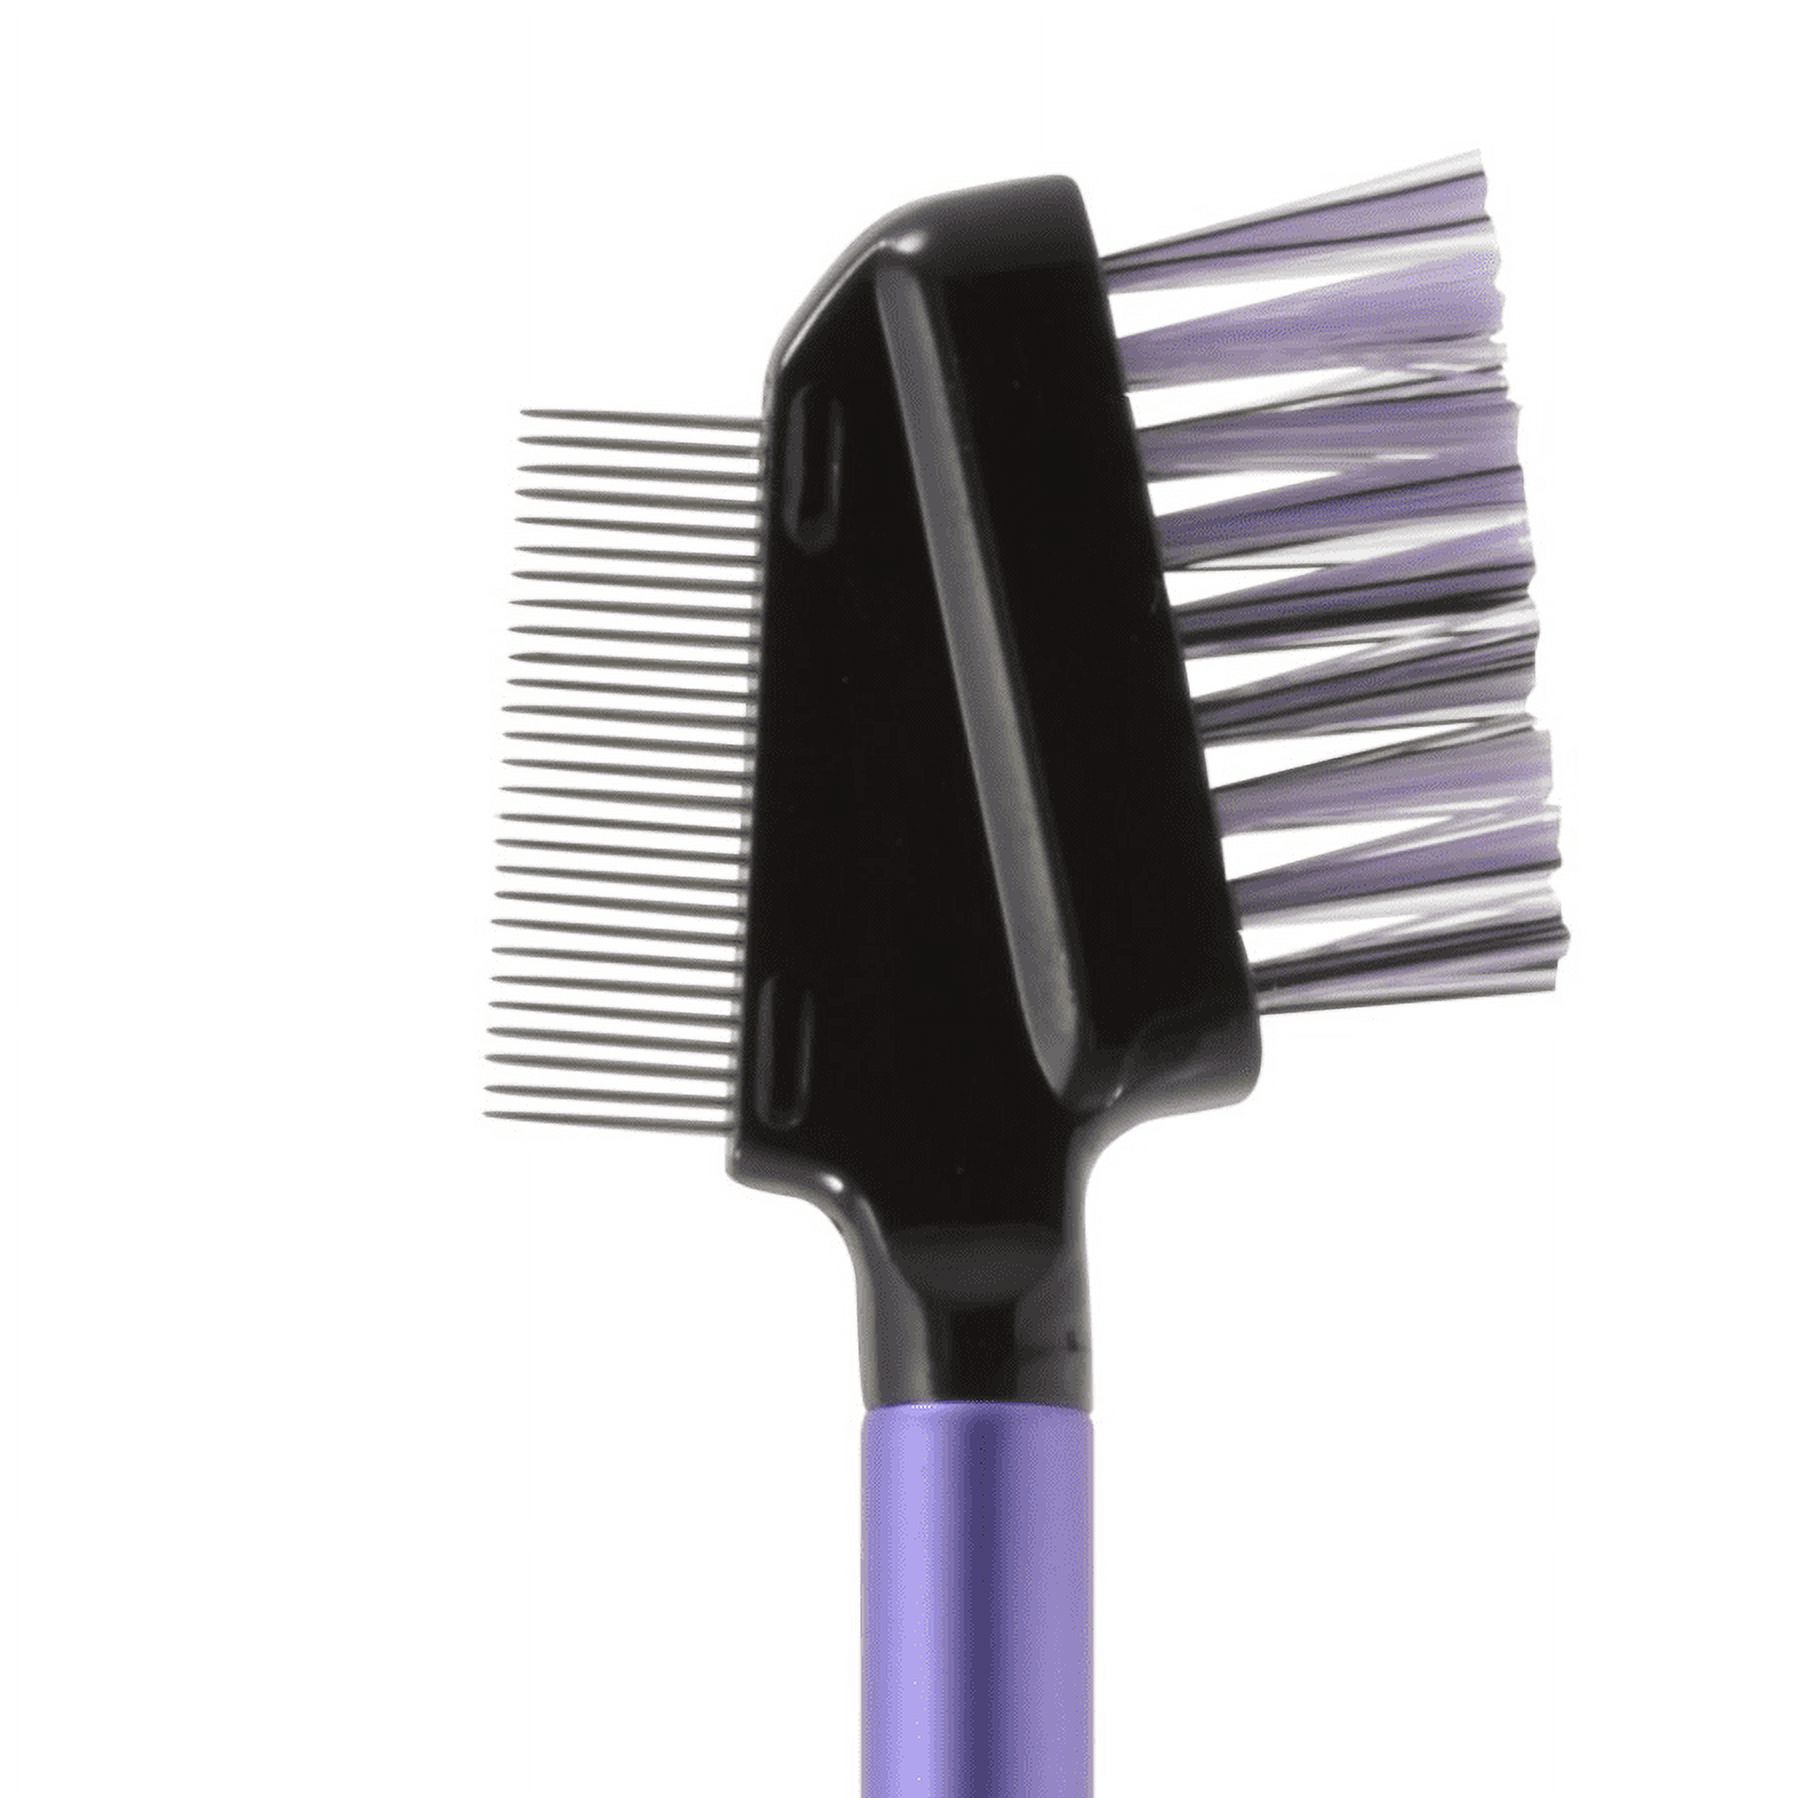 Real Techniques® Lash & Brow Grooming Makeup Brush, Single - image 2 of 2